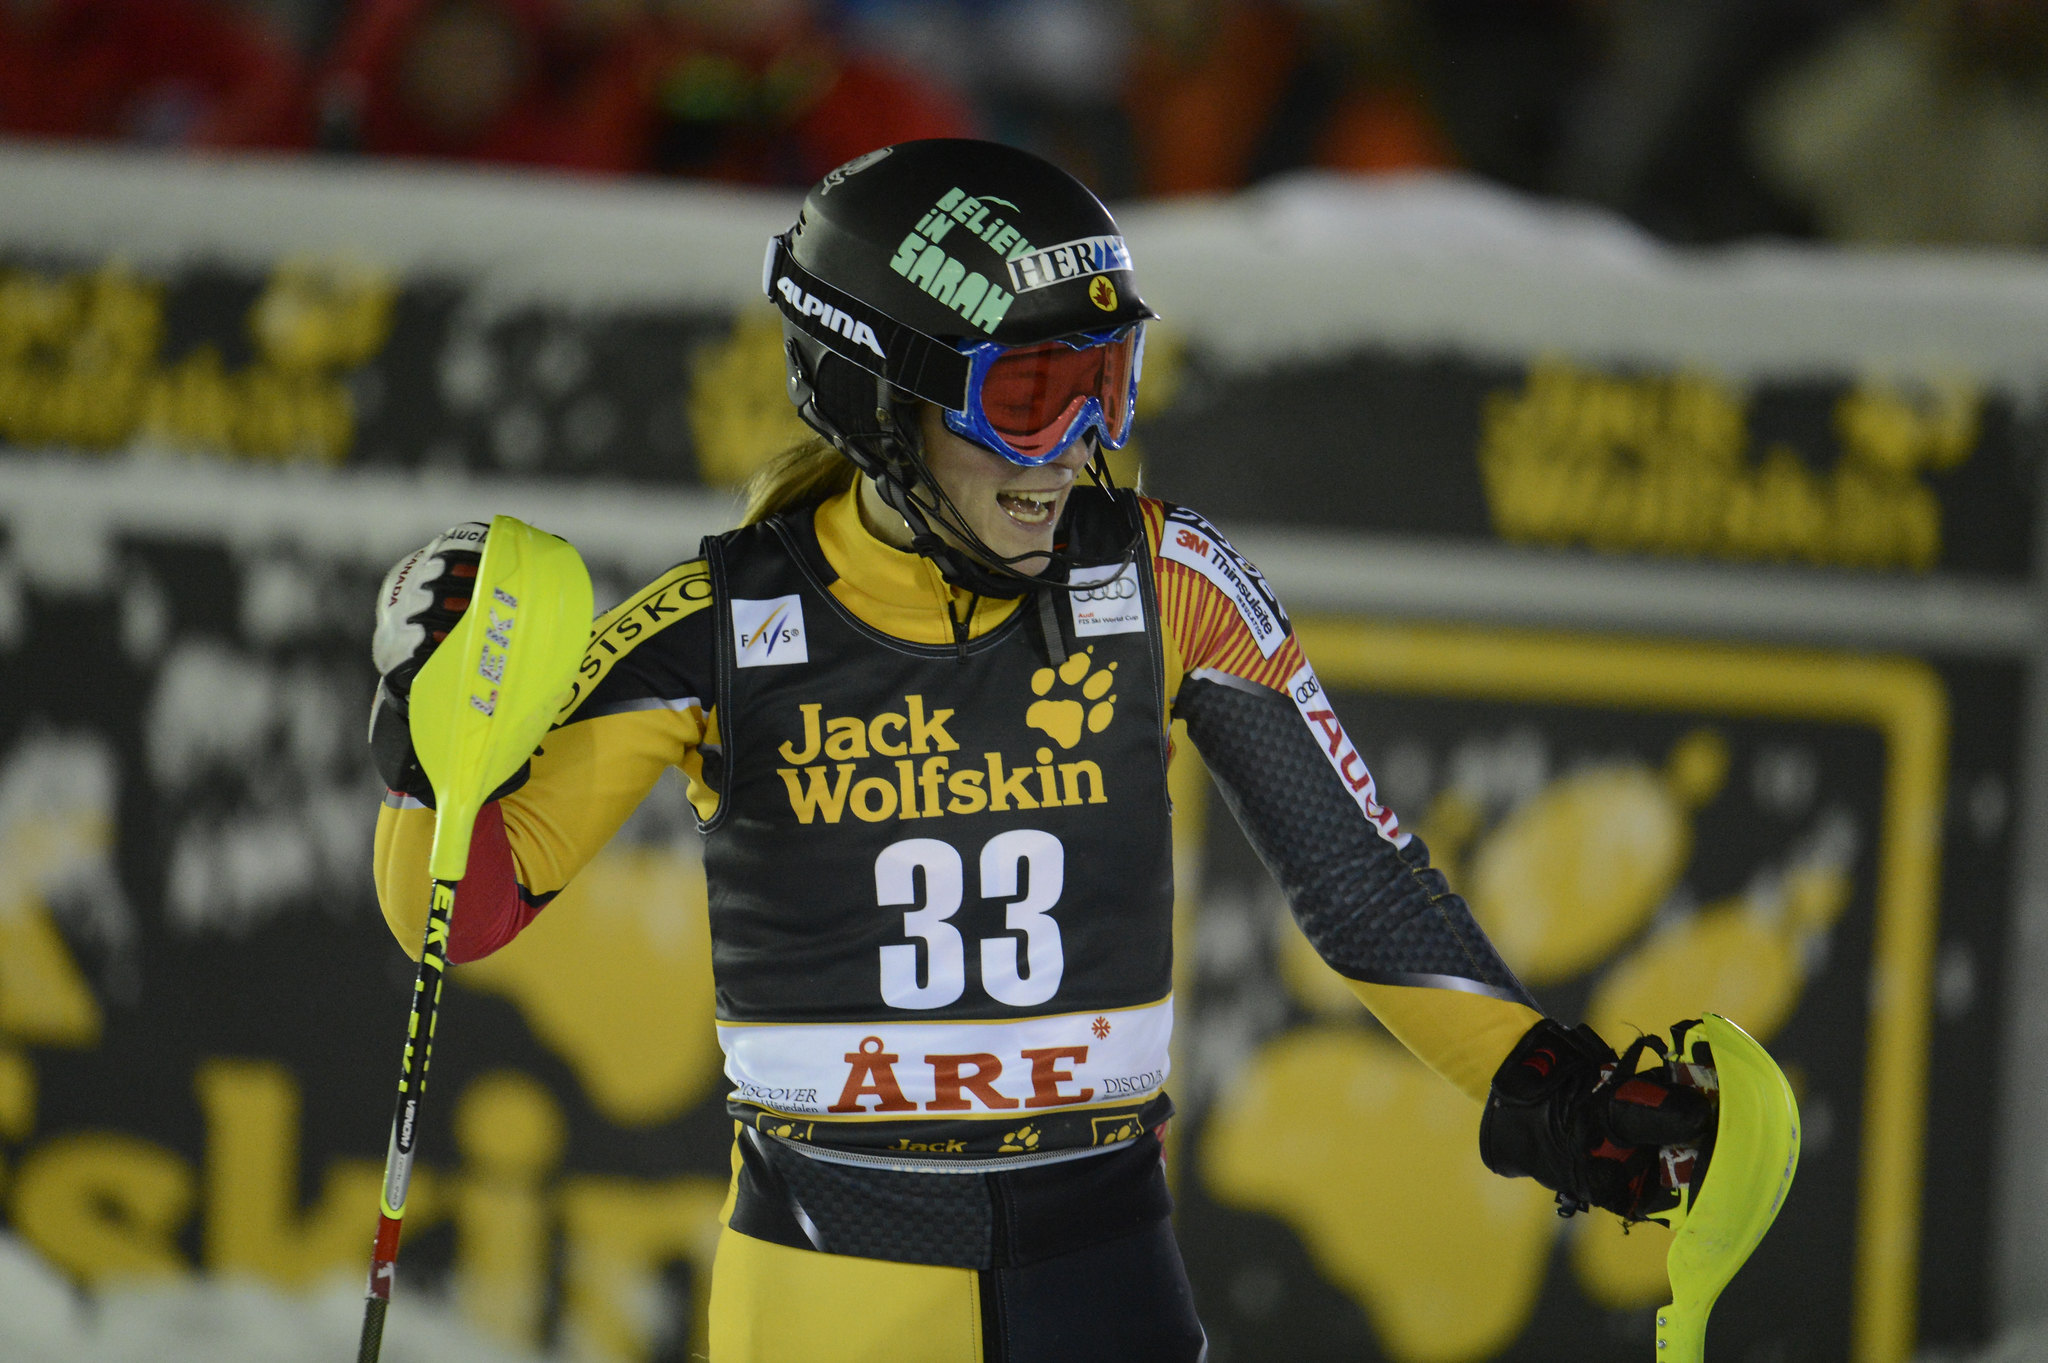 Brittany Phelan pleased with her second slalom run in Are, Sweden.